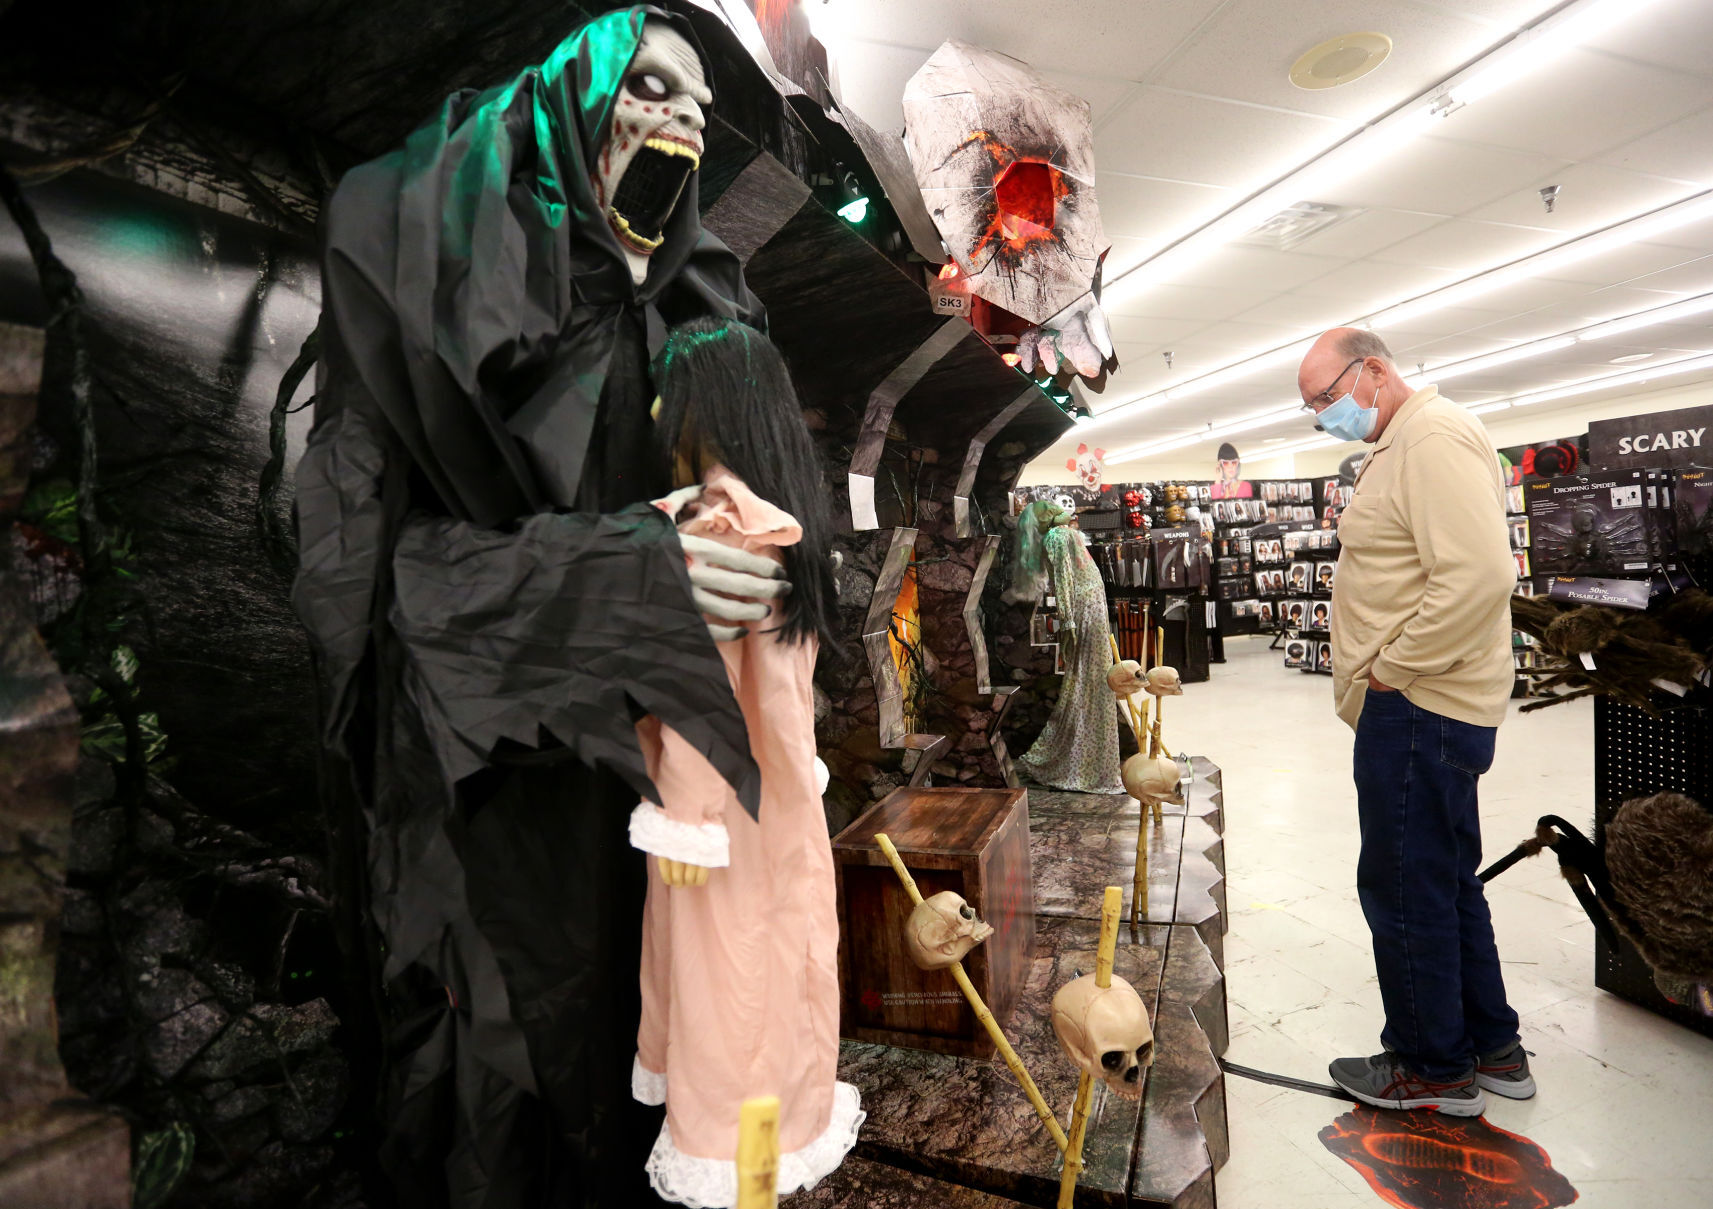 Neil Candee, of Dubuque, looks at a display at Spirit Halloween in Dubuque on Friday, Sept. 11, 2020. PHOTO CREDIT: JESSICA REILLY